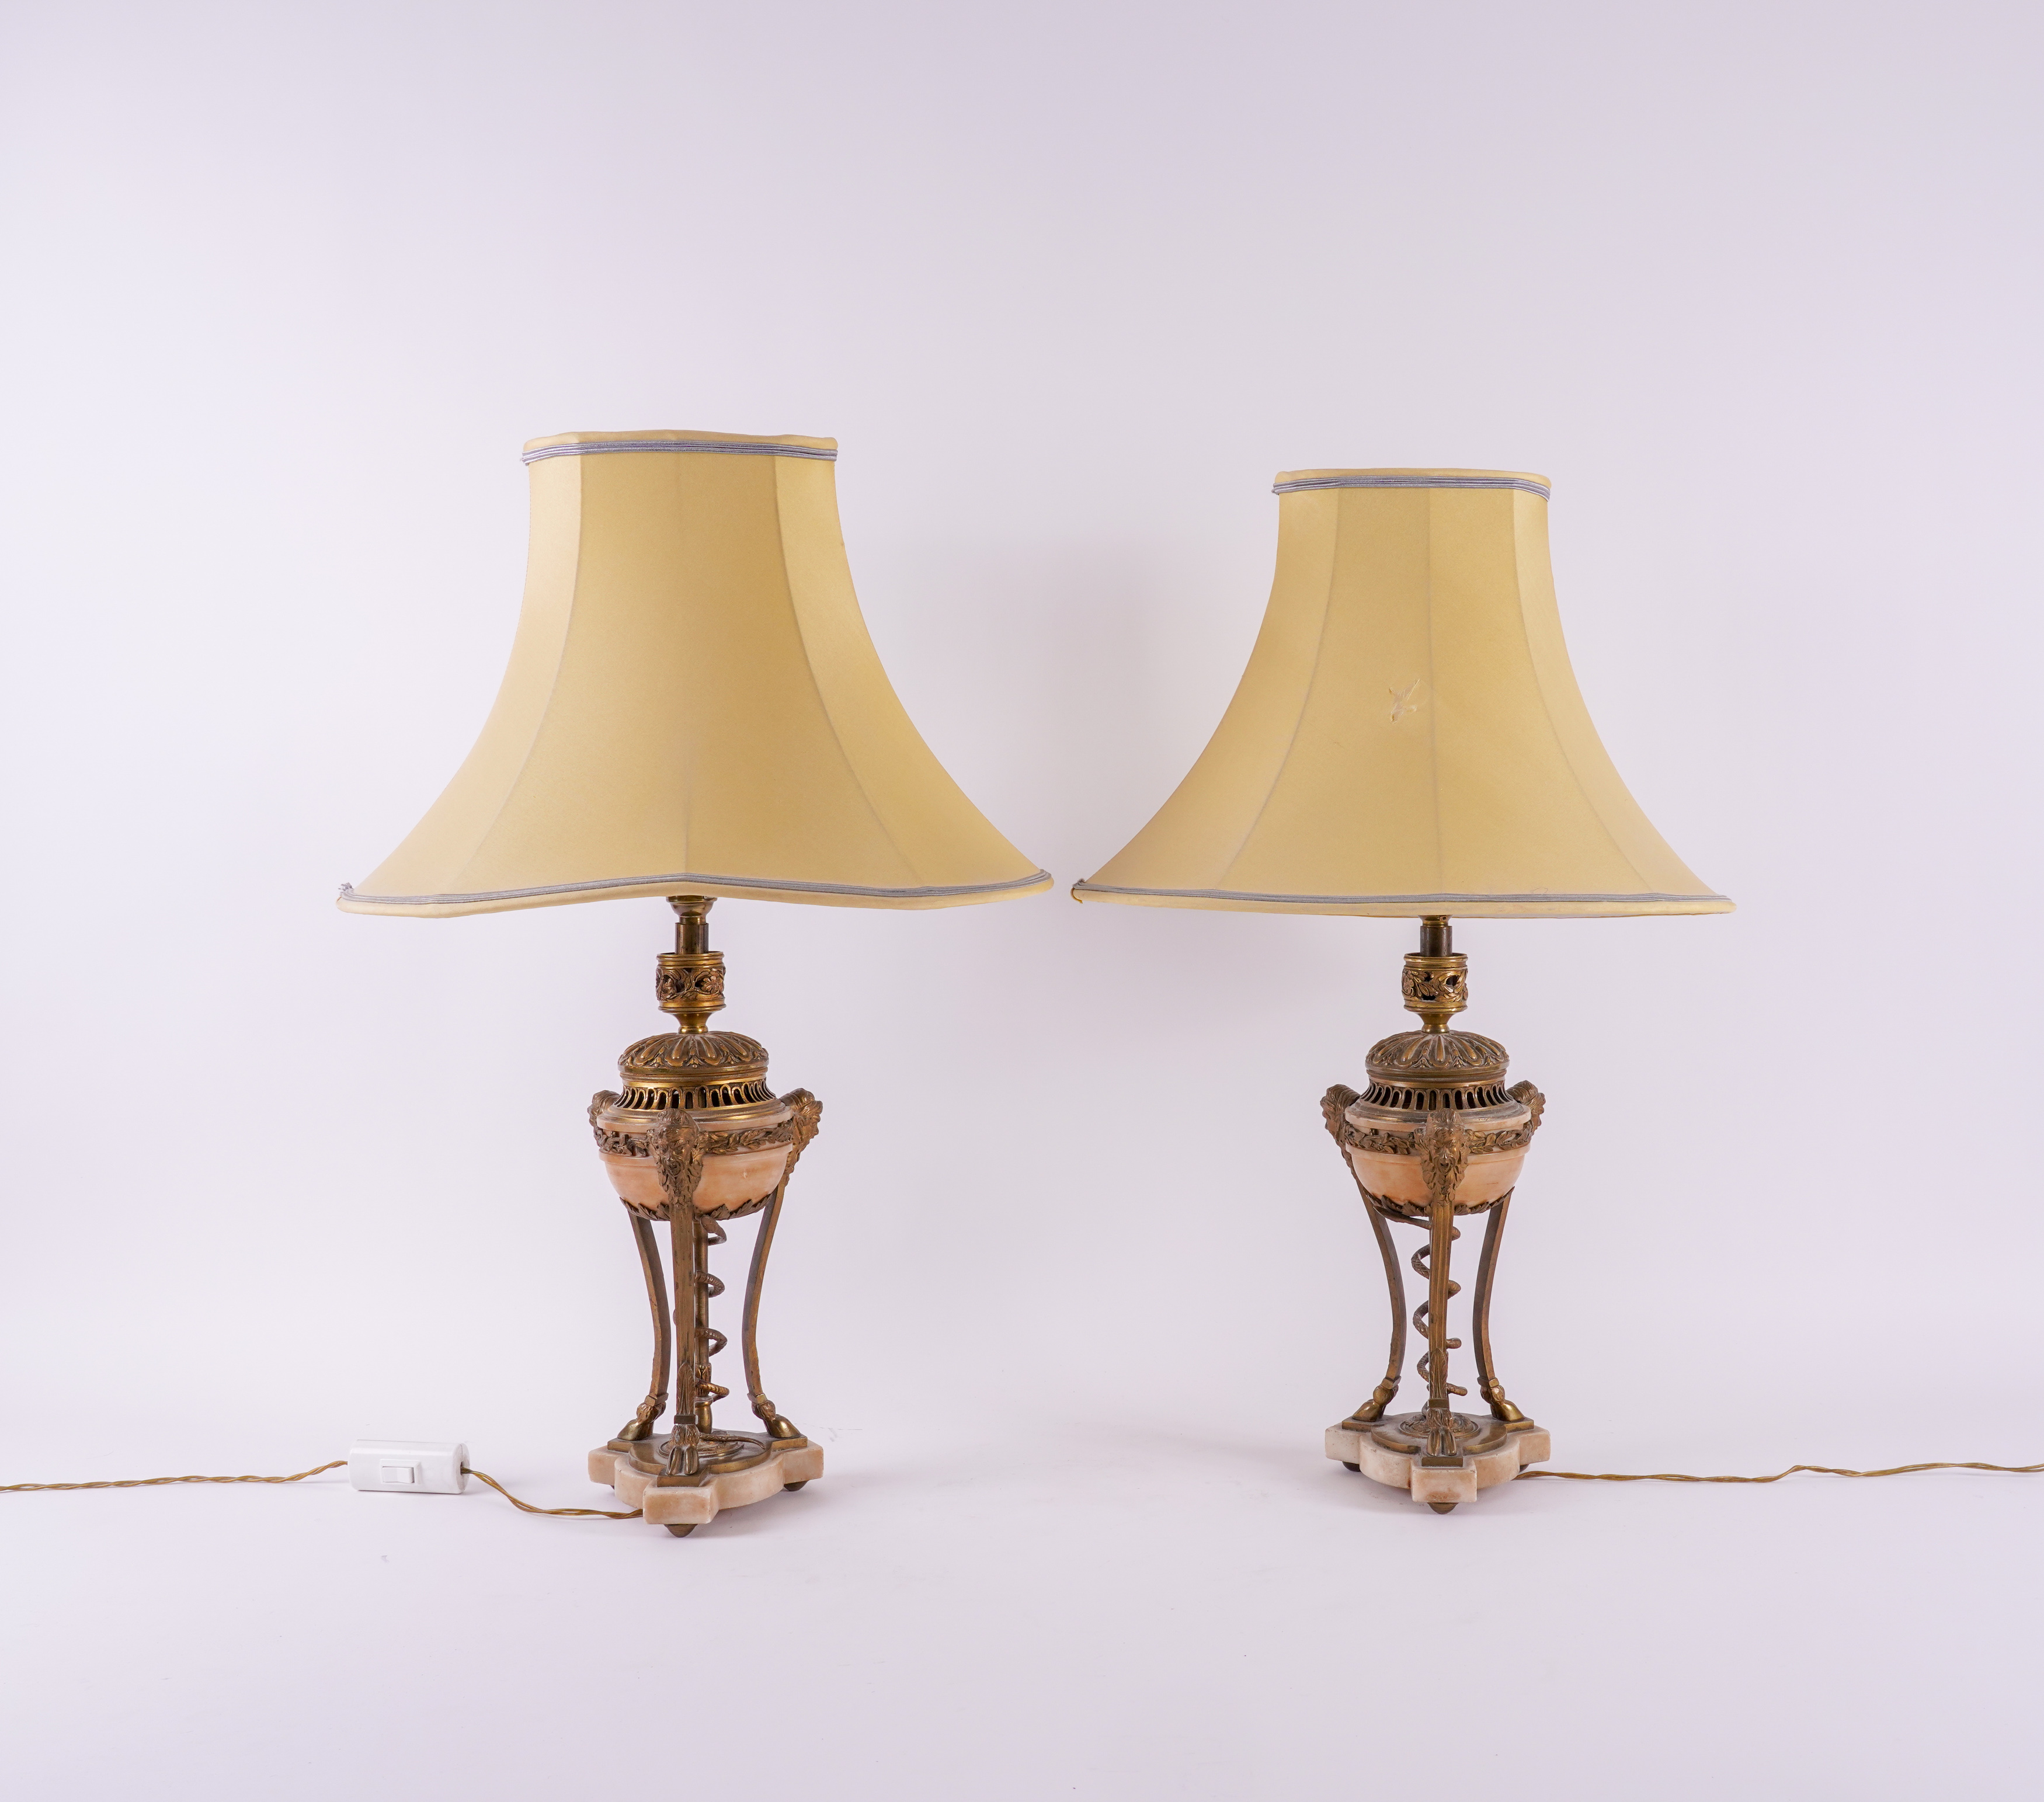 A PAIR OF LOUIS XVI STYLE GILT-METAL MOUNTED ALABASTER ANTHENIENNE TABLE LAMPS (2) - Image 6 of 6